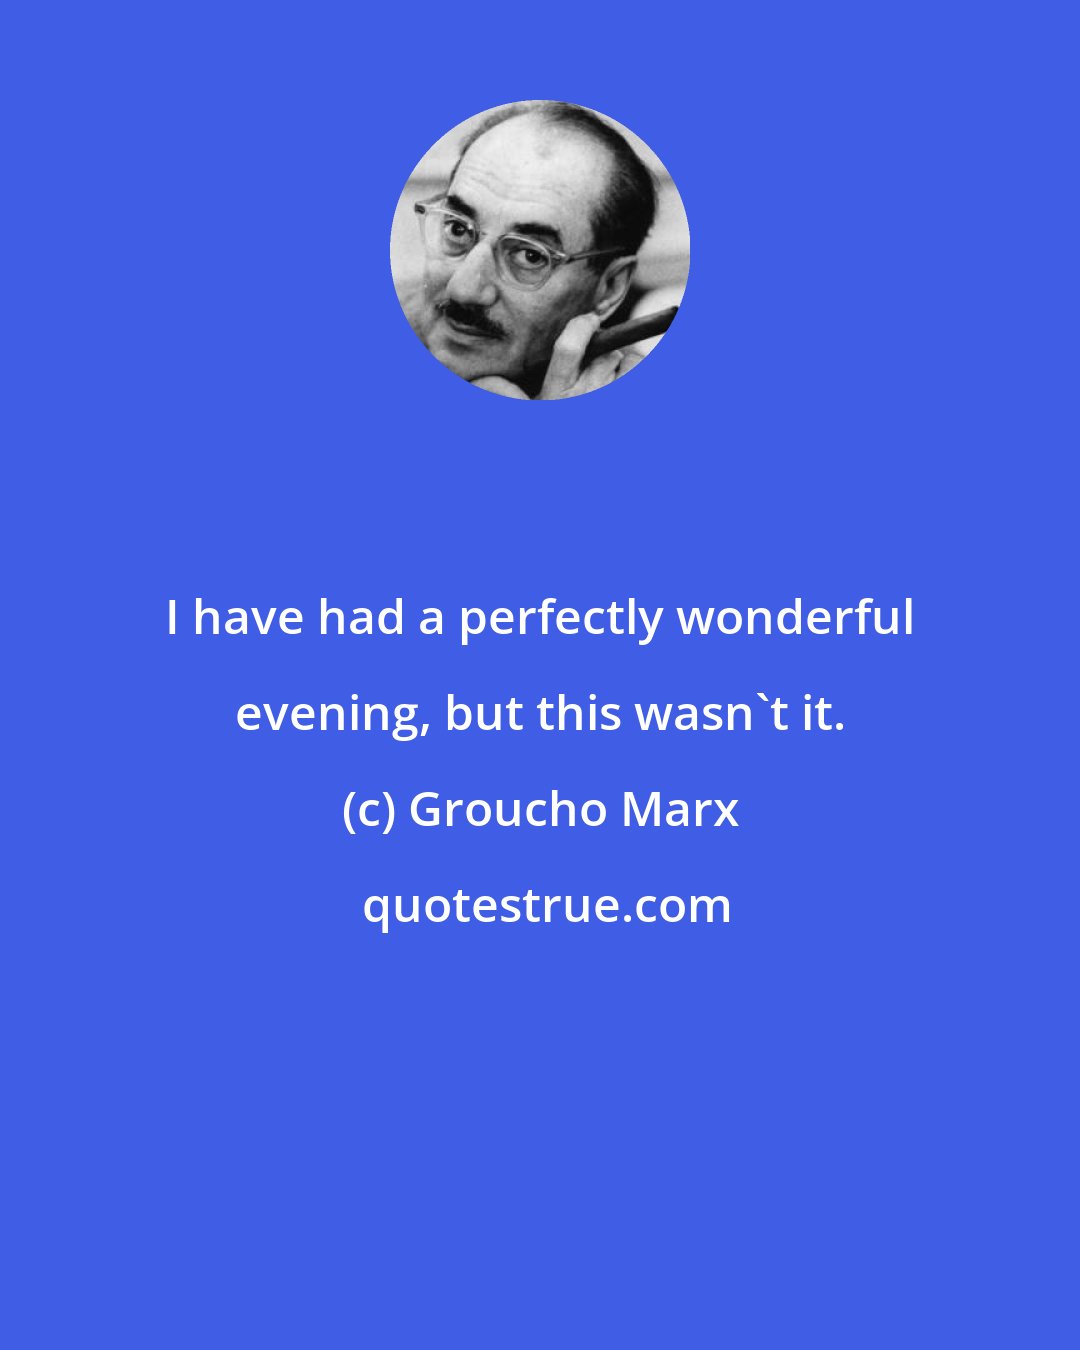 Groucho Marx: I have had a perfectly wonderful evening, but this wasn't it.